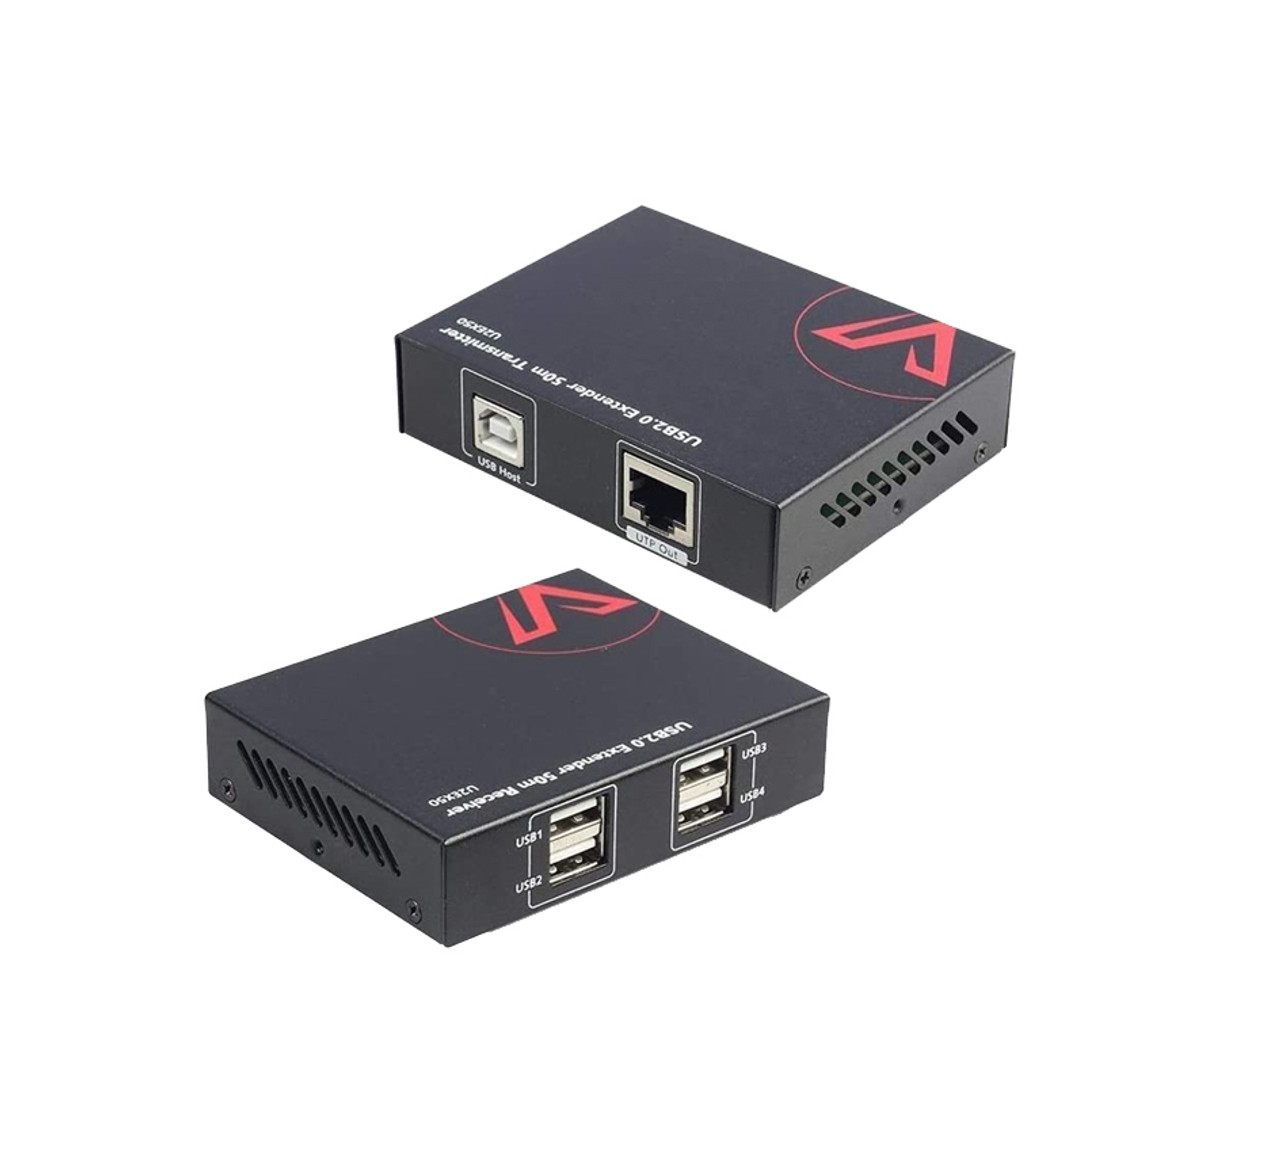 4 Port USB 2.0 Extender over CAT5e/CAT6 Cable Supports 60M Range